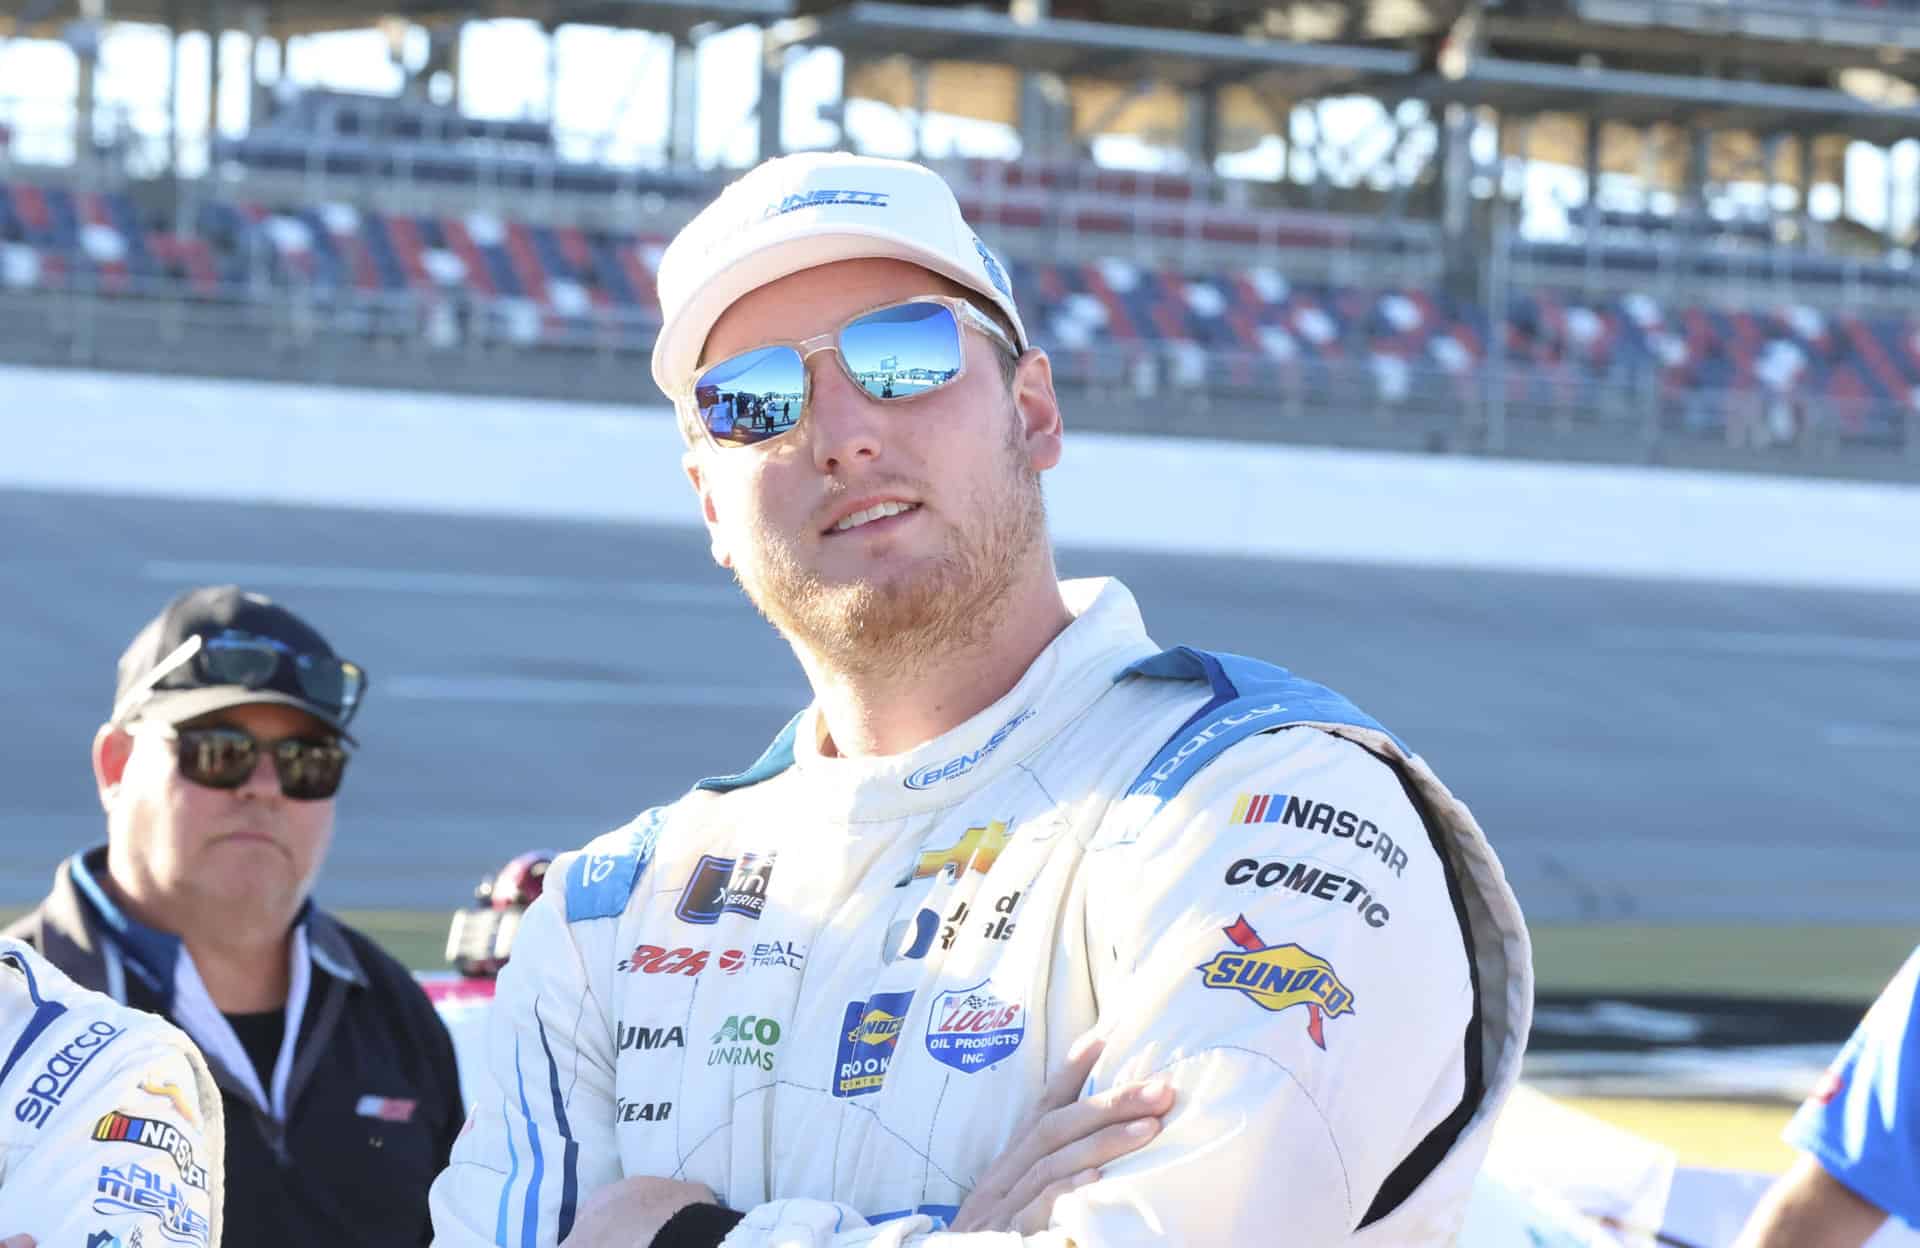 Austin Hill earns his first career NASCAR Xfinity Series pole at Talladega Superspeedway for the 2022 Sparks 300. Photo by Rachel Schuoler / Kickin' the Tires.